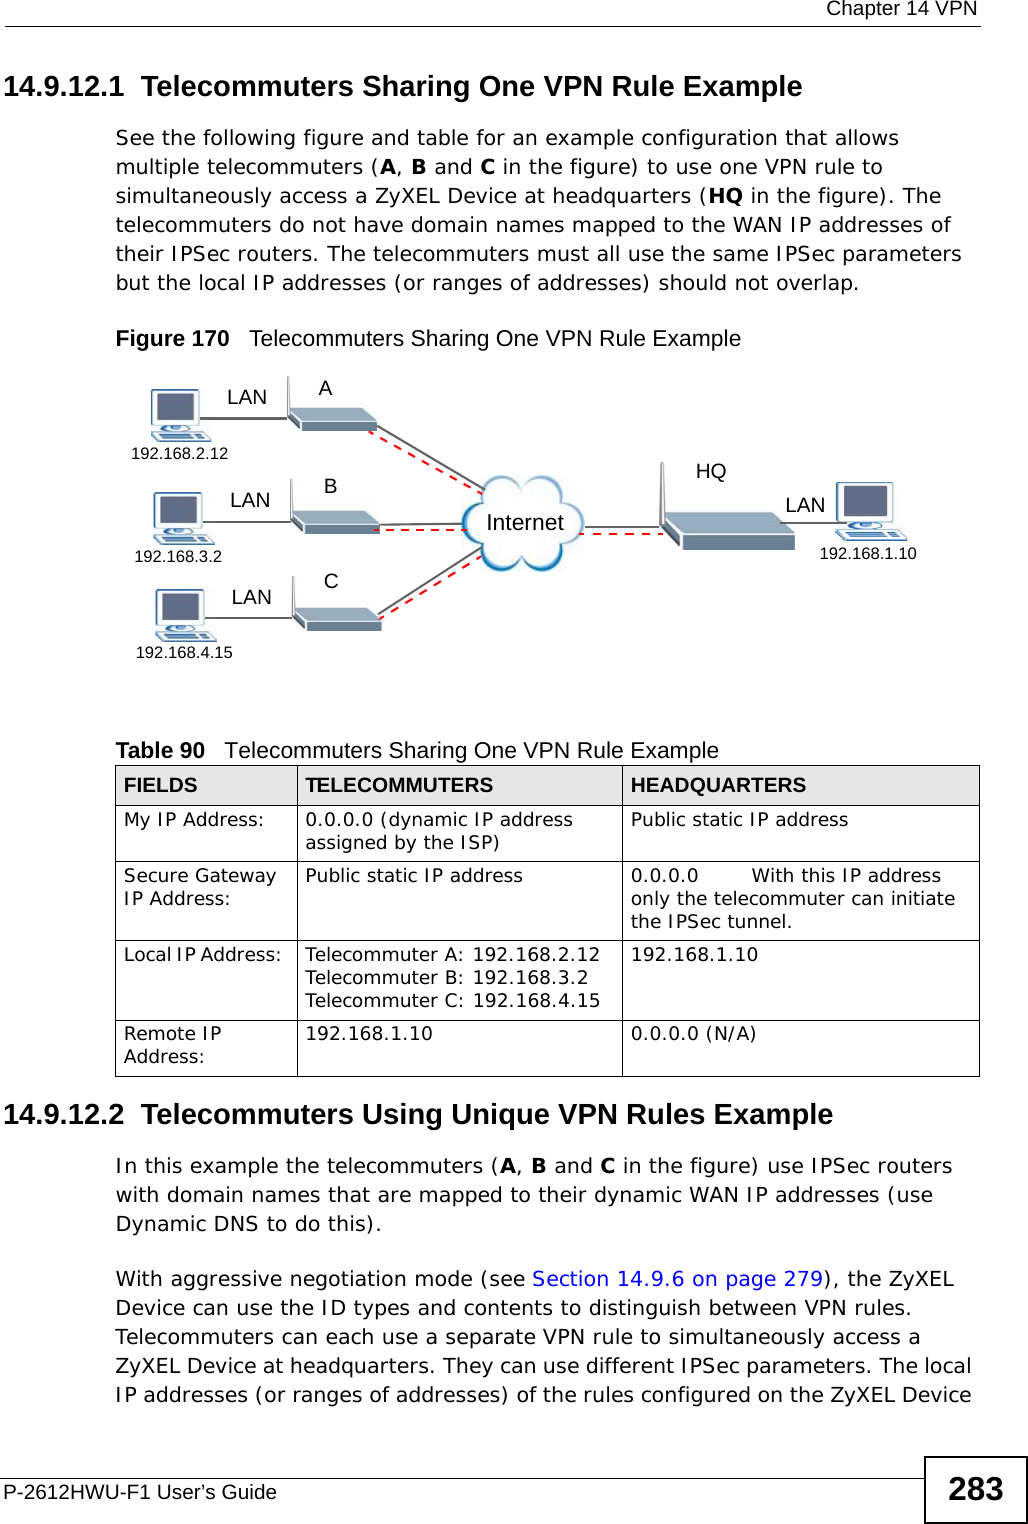  Chapter 14 VPNP-2612HWU-F1 User’s Guide 28314.9.12.1  Telecommuters Sharing One VPN Rule ExampleSee the following figure and table for an example configuration that allows multiple telecommuters (A, B and C in the figure) to use one VPN rule to simultaneously access a ZyXEL Device at headquarters (HQ in the figure). The telecommuters do not have domain names mapped to the WAN IP addresses of their IPSec routers. The telecommuters must all use the same IPSec parameters but the local IP addresses (or ranges of addresses) should not overlap. Figure 170   Telecommuters Sharing One VPN Rule Example14.9.12.2  Telecommuters Using Unique VPN Rules ExampleIn this example the telecommuters (A, B and C in the figure) use IPSec routers with domain names that are mapped to their dynamic WAN IP addresses (use Dynamic DNS to do this).With aggressive negotiation mode (see Section 14.9.6 on page 279), the ZyXEL Device can use the ID types and contents to distinguish between VPN rules. Telecommuters can each use a separate VPN rule to simultaneously access a ZyXEL Device at headquarters. They can use different IPSec parameters. The local IP addresses (or ranges of addresses) of the rules configured on the ZyXEL Device Table 90   Telecommuters Sharing One VPN Rule ExampleFIELDS TELECOMMUTERS HEADQUARTERSMy IP Address:  0.0.0.0 (dynamic IP address assigned by the ISP) Public static IP address Secure Gateway IP Address: Public static IP address 0.0.0.0        With this IP address only the telecommuter can initiate the IPSec tunnel.Local IP Address:  Telecommuter A: 192.168.2.12Telecommuter B: 192.168.3.2Telecommuter C: 192.168.4.15192.168.1.10Remote IP Address: 192.168.1.10 0.0.0.0 (N/A)LAN192.168.2.12LAN192.168.3.2LAN192.168.4.15ABCLAN192.168.1.10HQInternet